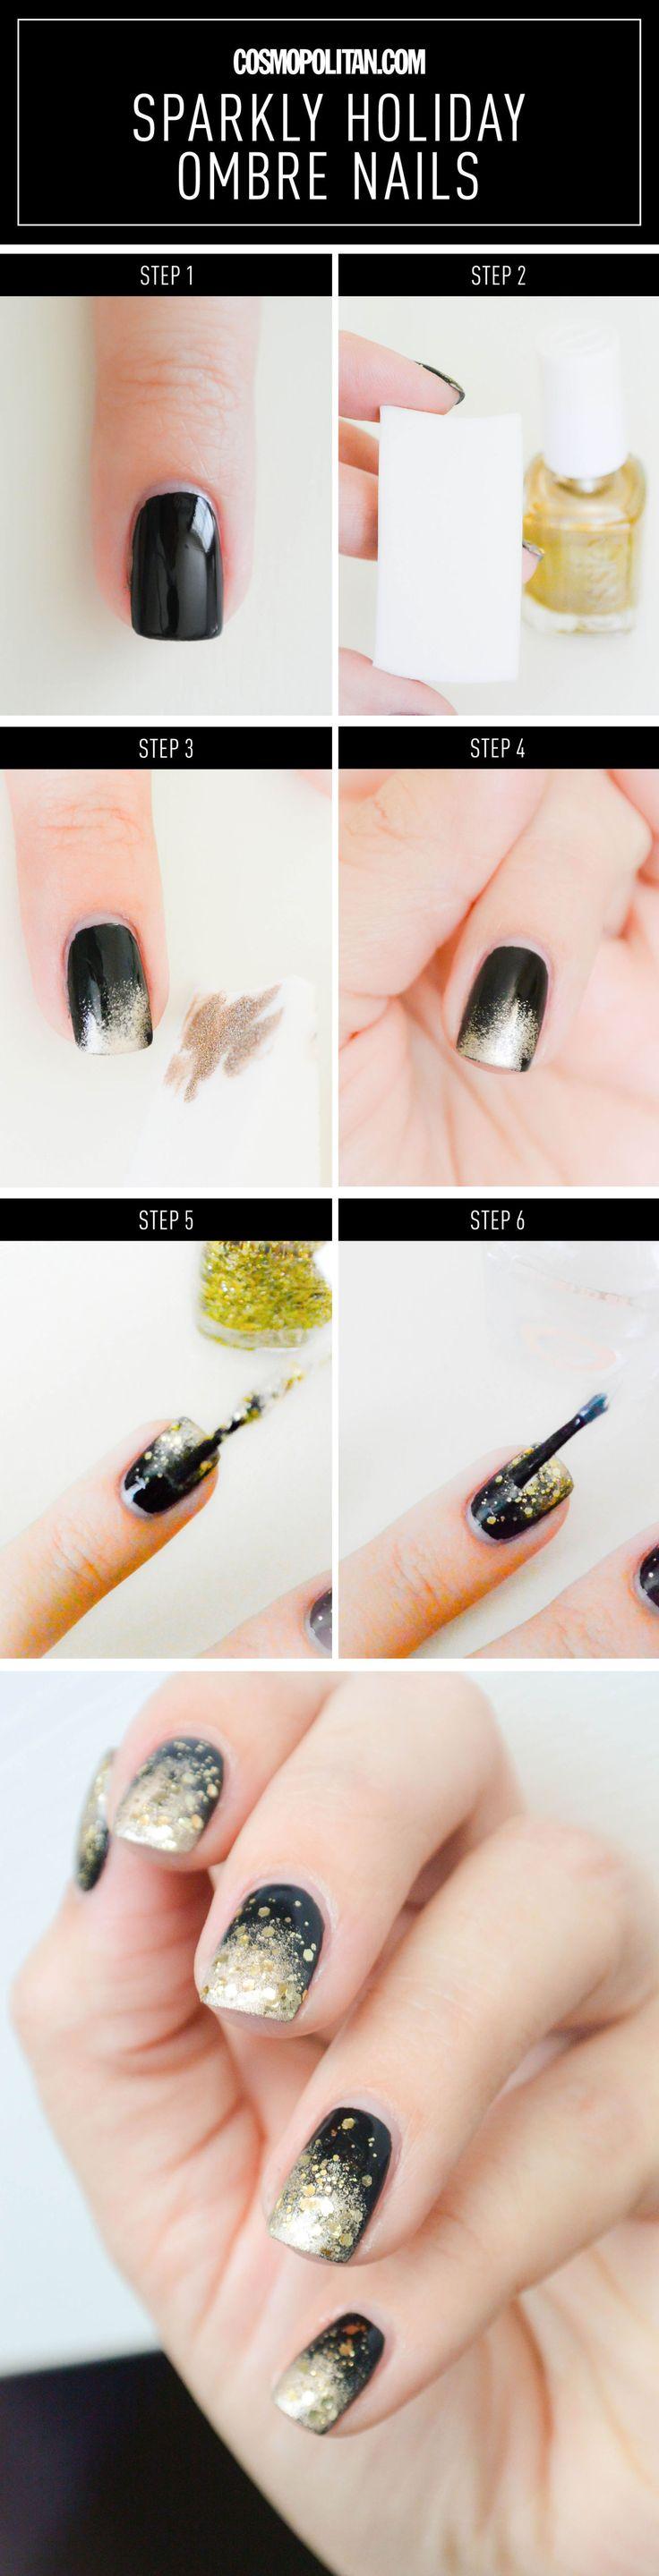 Nail Art How-To: Sparkly Black And Gold Ombré Mani #2811986 - Weddbook